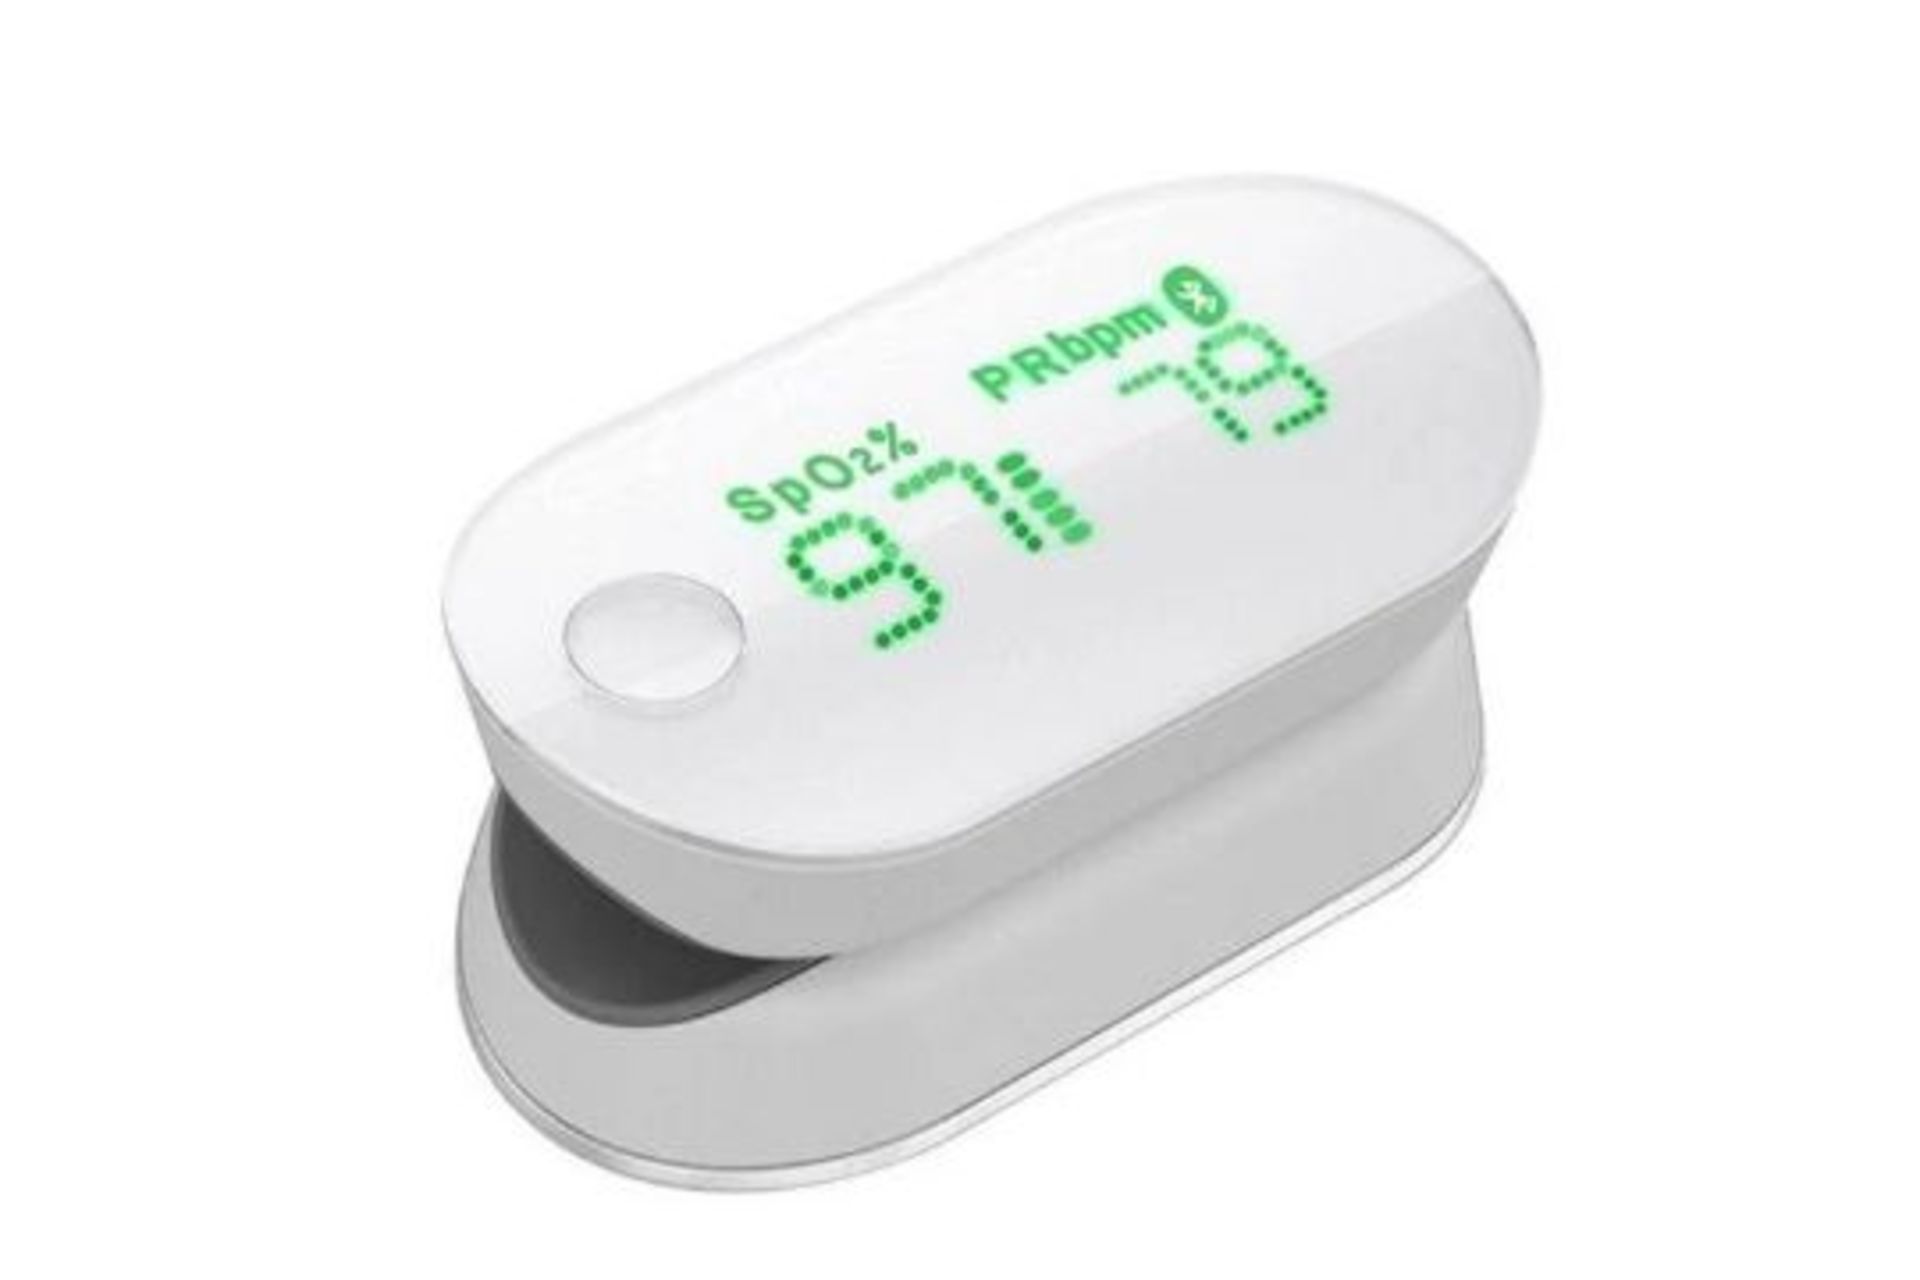 NEW & BOXED iHealth Air Pulse Oximeter. Accurately measure your blood oxygen level, pulse rate, - Image 2 of 6